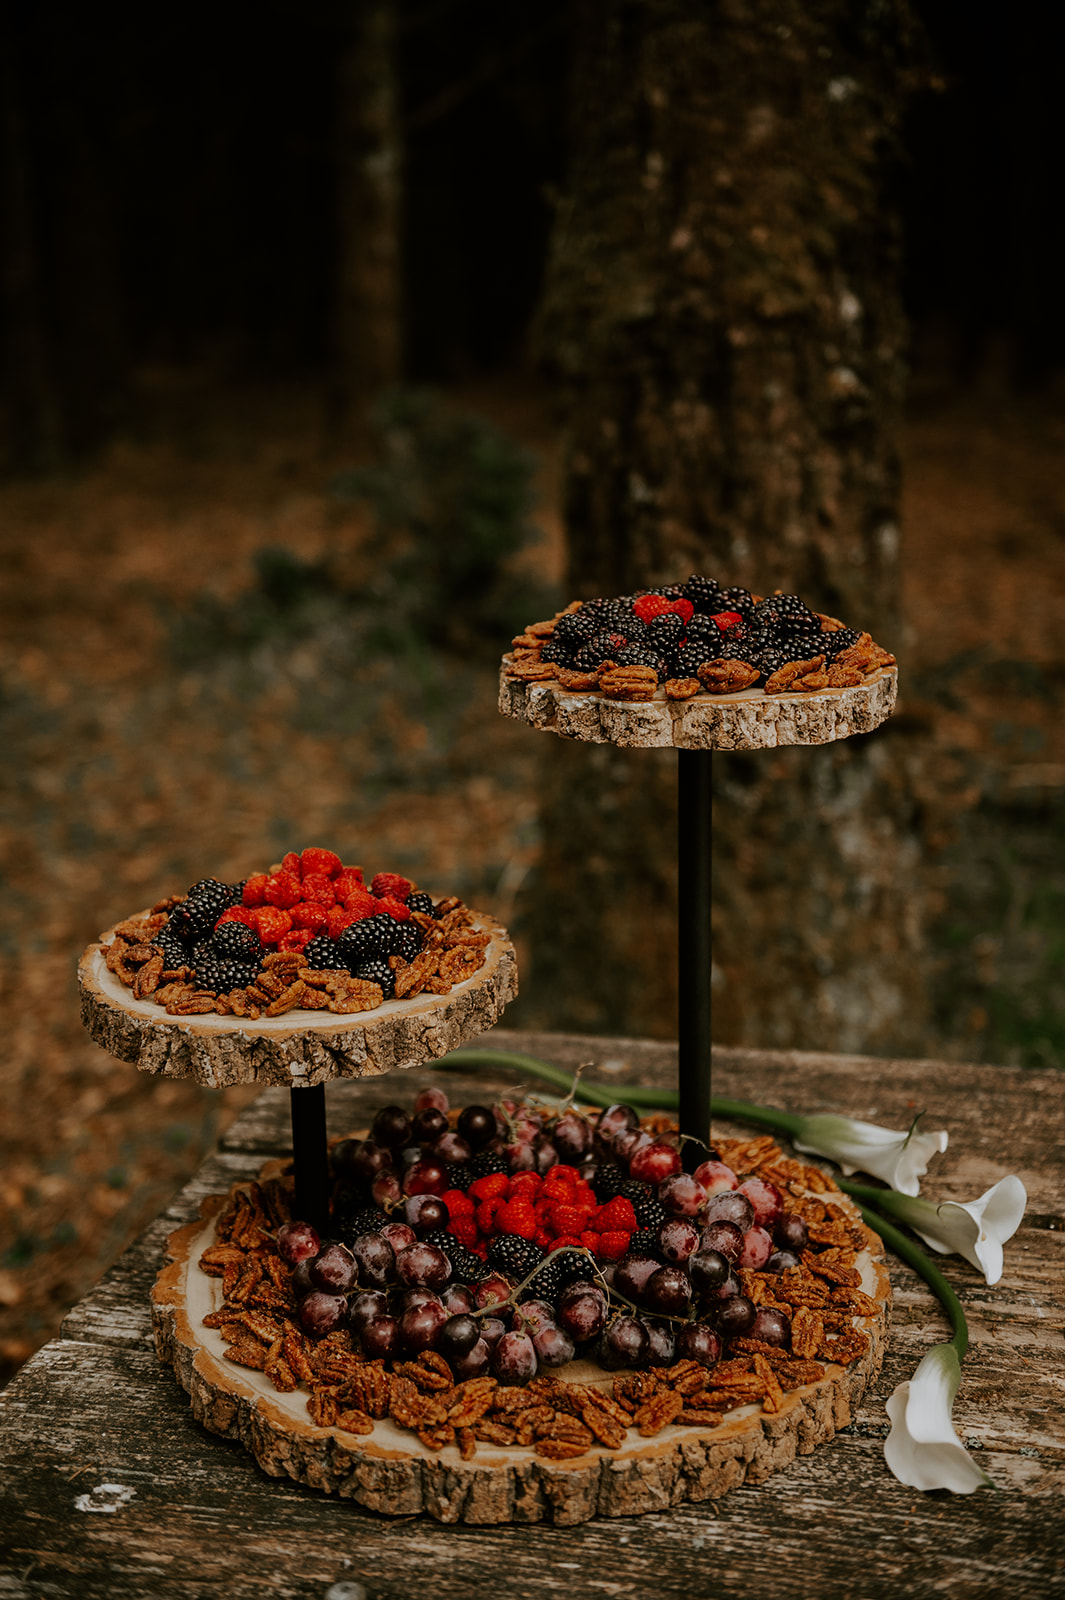 Vegan healthy wedding desert ideas. Berries and nuts on tiered wooden rounds